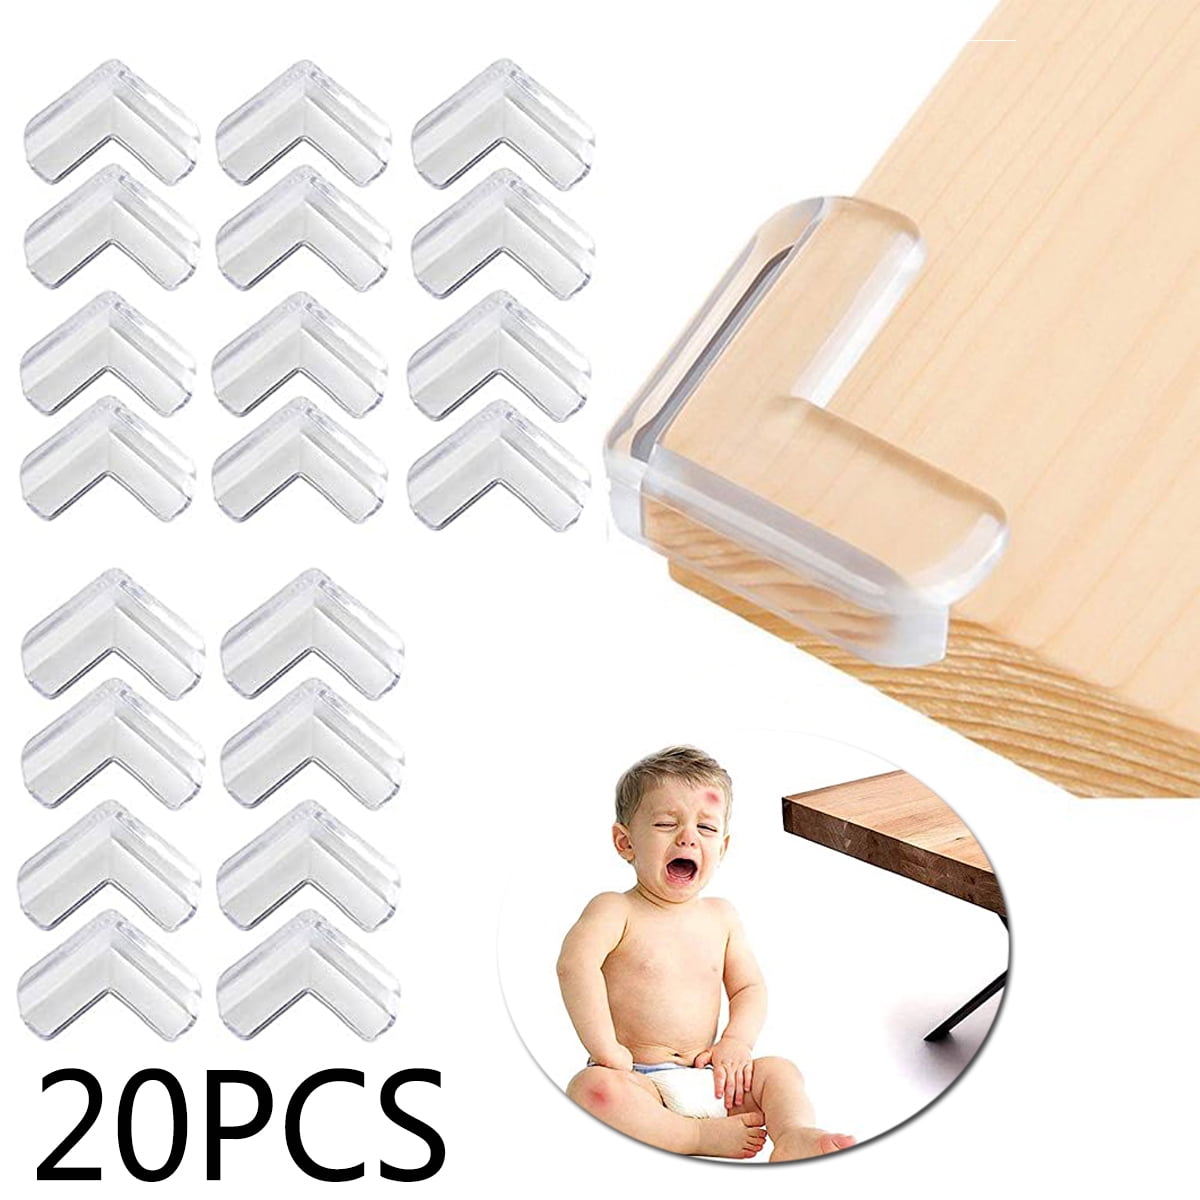 CalMyotis Corner Protector for Baby, Protectors Guards - Furniture Corner Guard & Edge Safety Bumpers - Baby Proof Bumper & Cushion to Cover Sharp Furniture & T